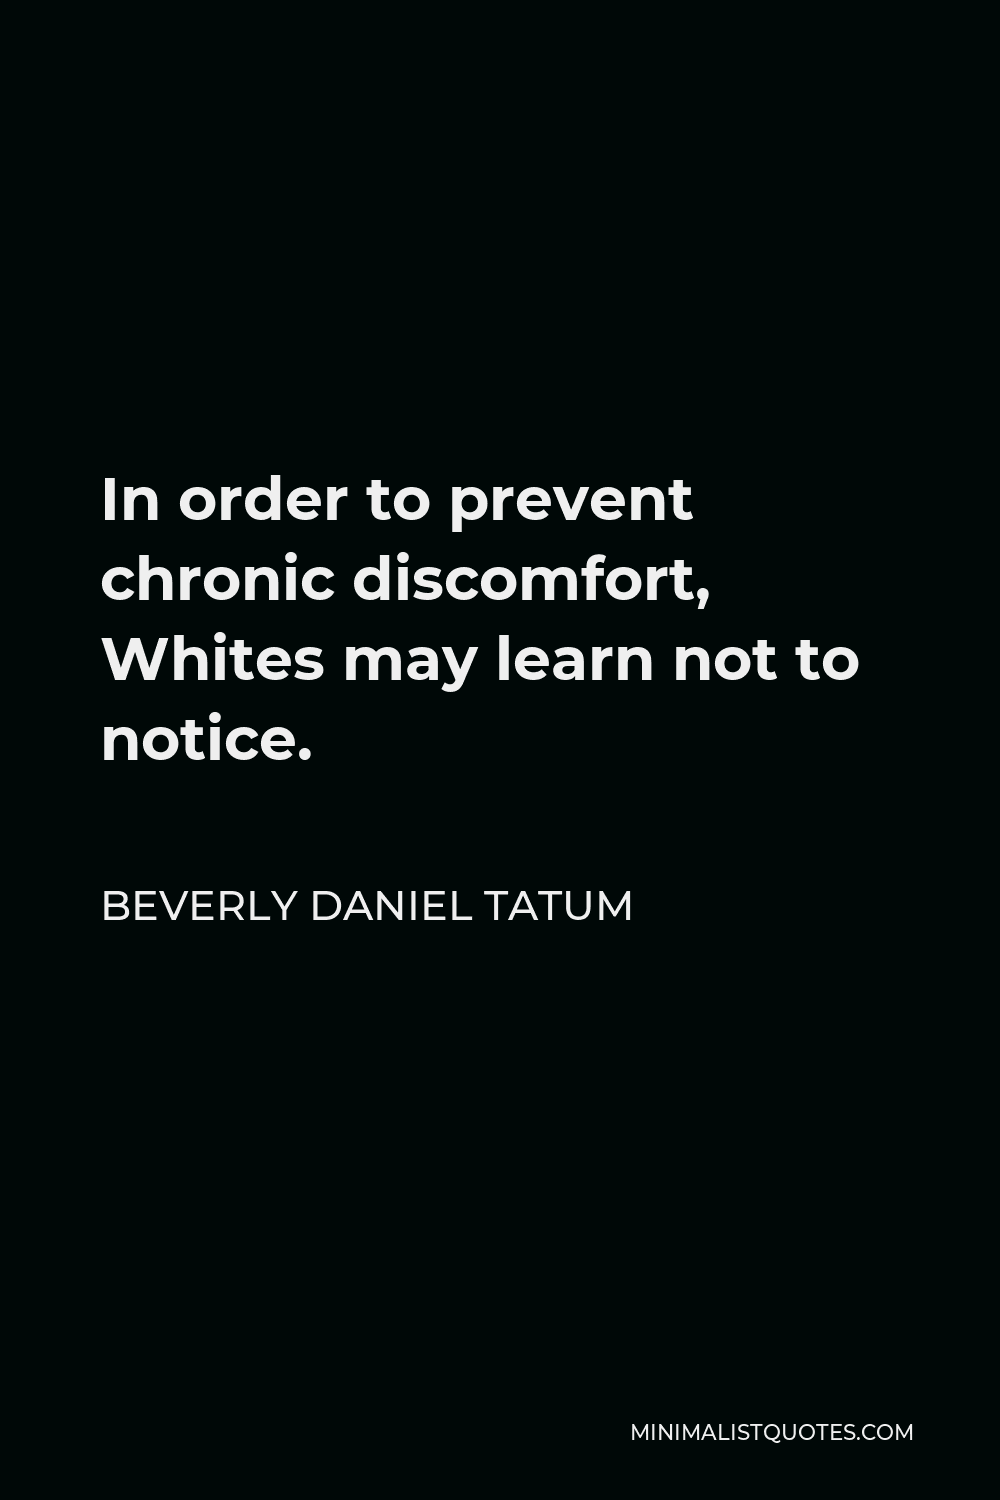 Beverly Daniel Tatum Quote - In order to prevent chronic discomfort, Whites may learn not to notice.